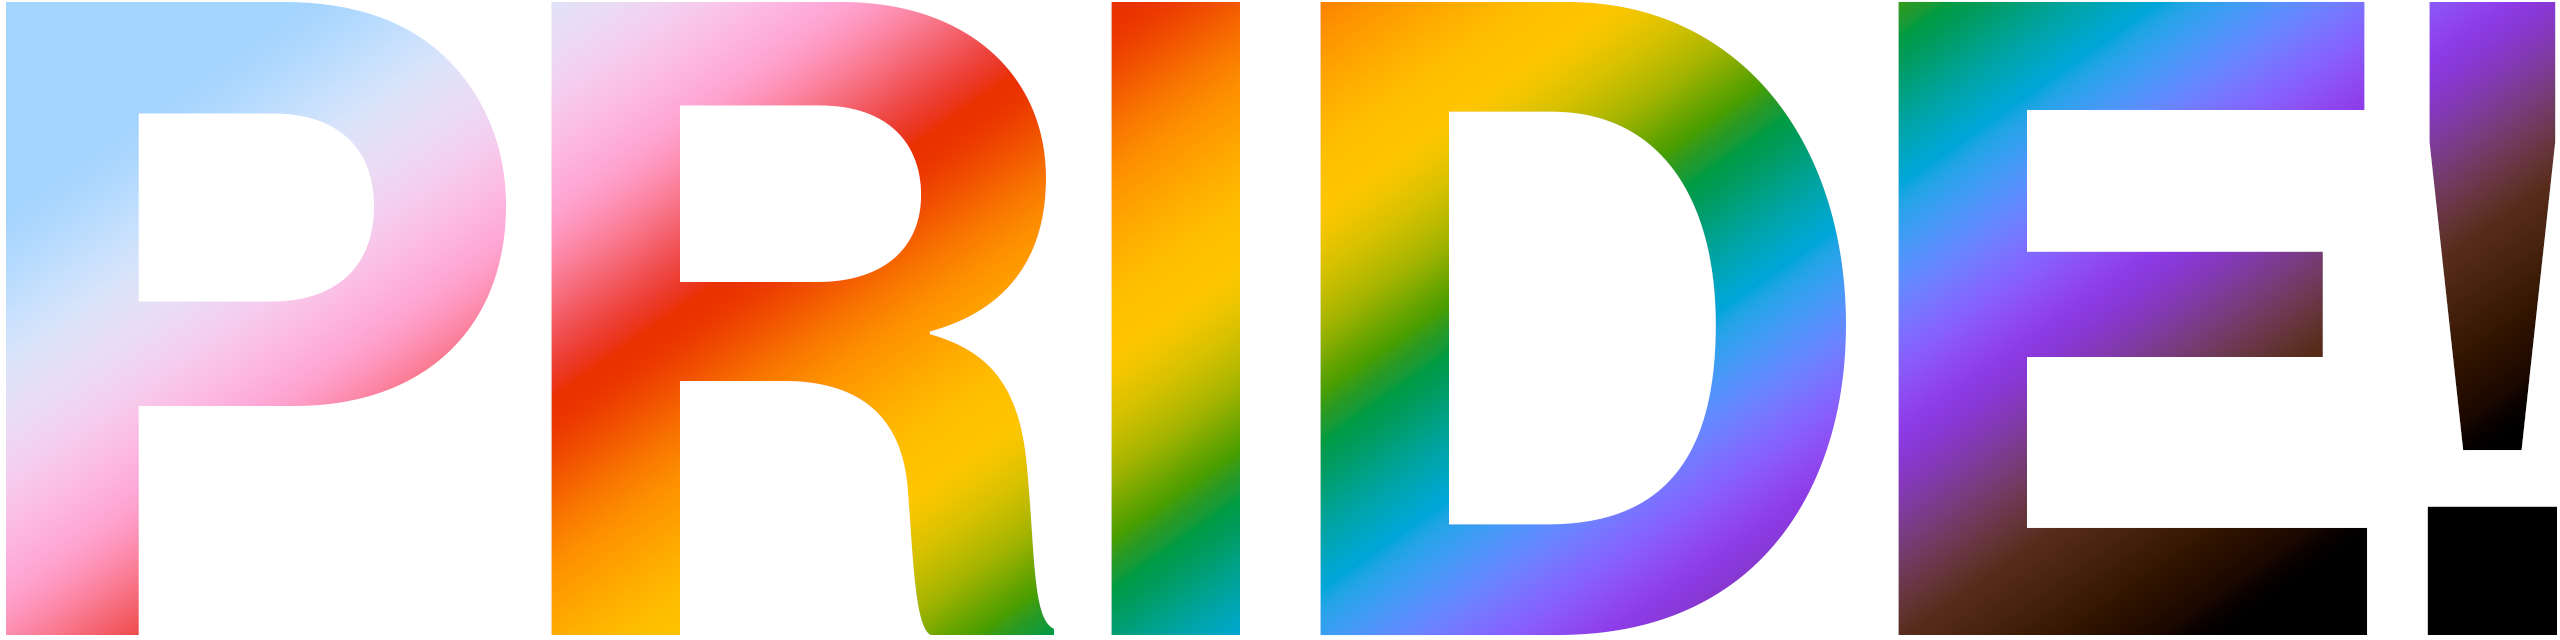 A letter graphic that spells out Pride in a rainbow gradient. 